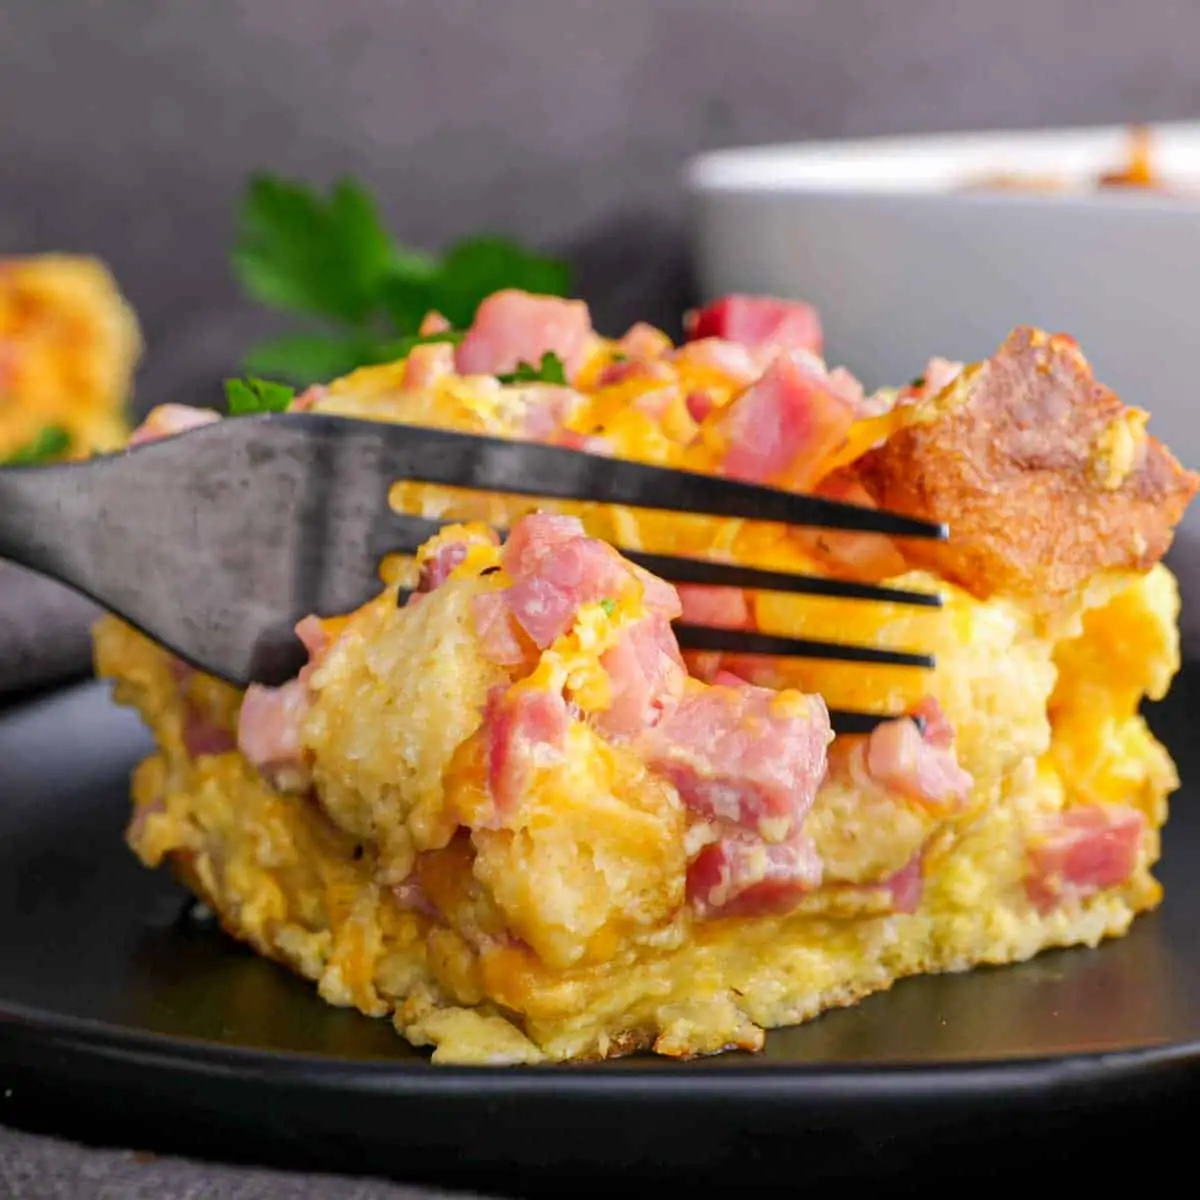 Ham and Cheese English Muffin Breakfast Casserole on a plate with a fork.